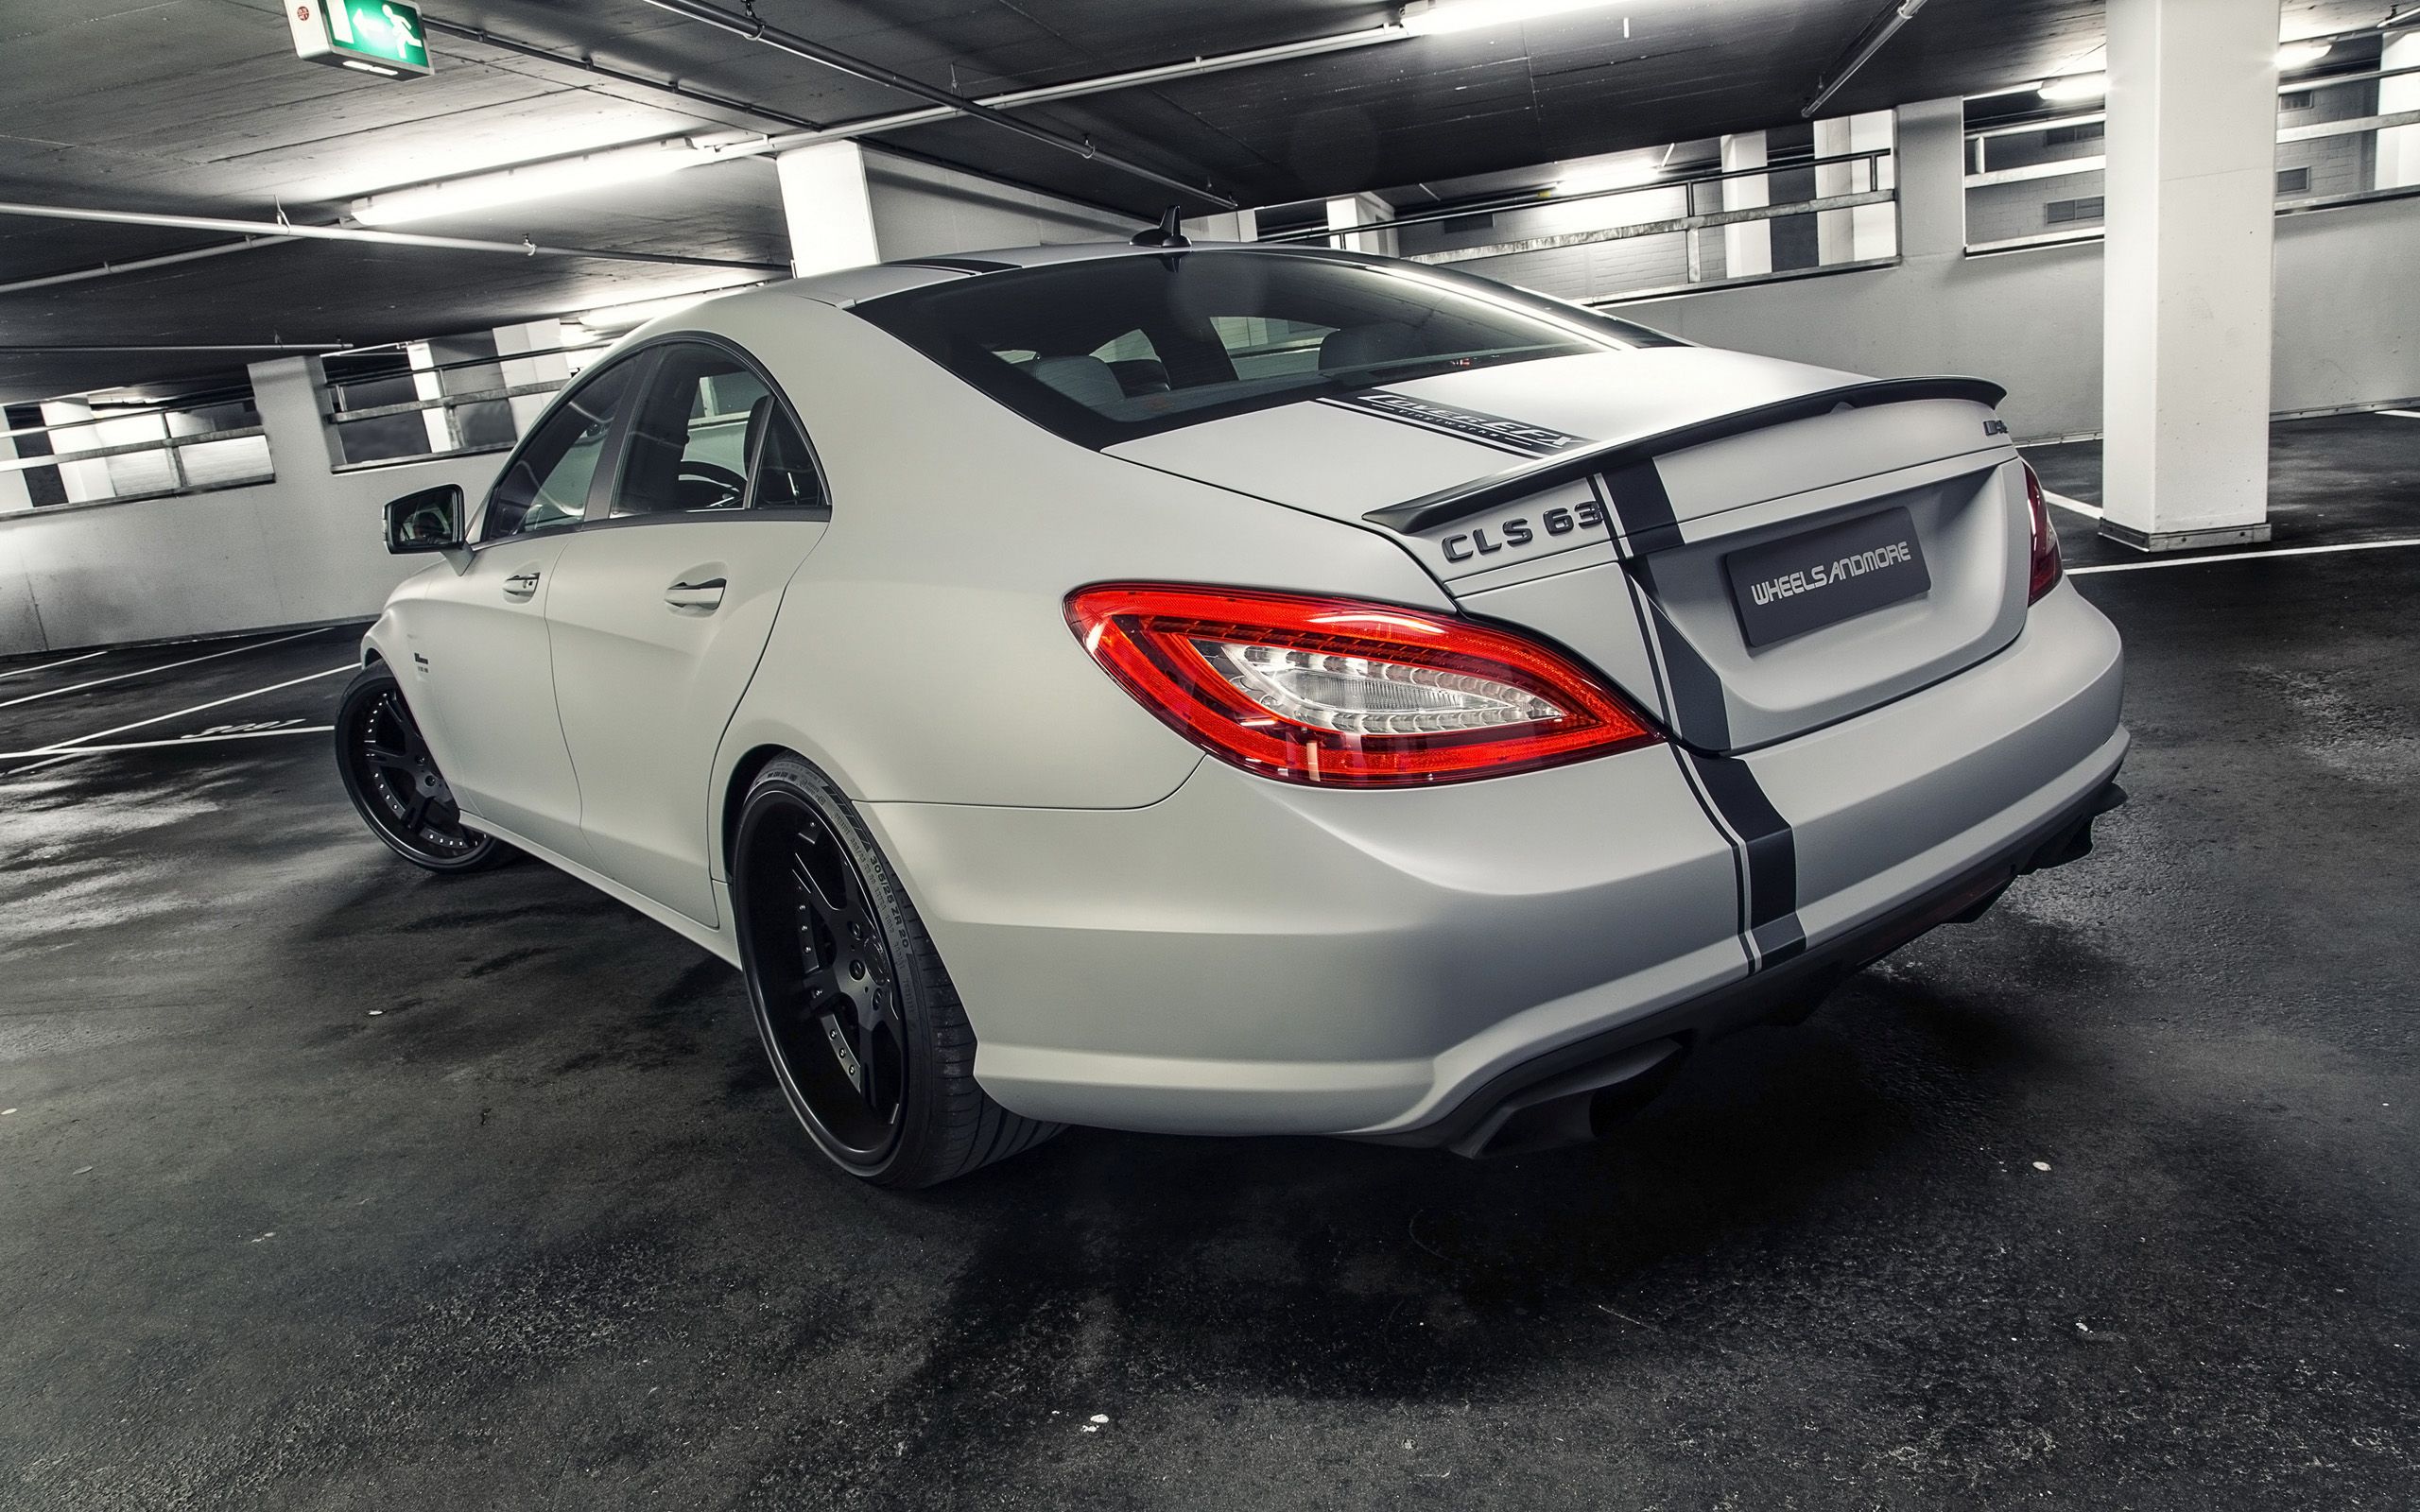 CLS 63 AMG Wallpaper Free CLS 63 AMG Background